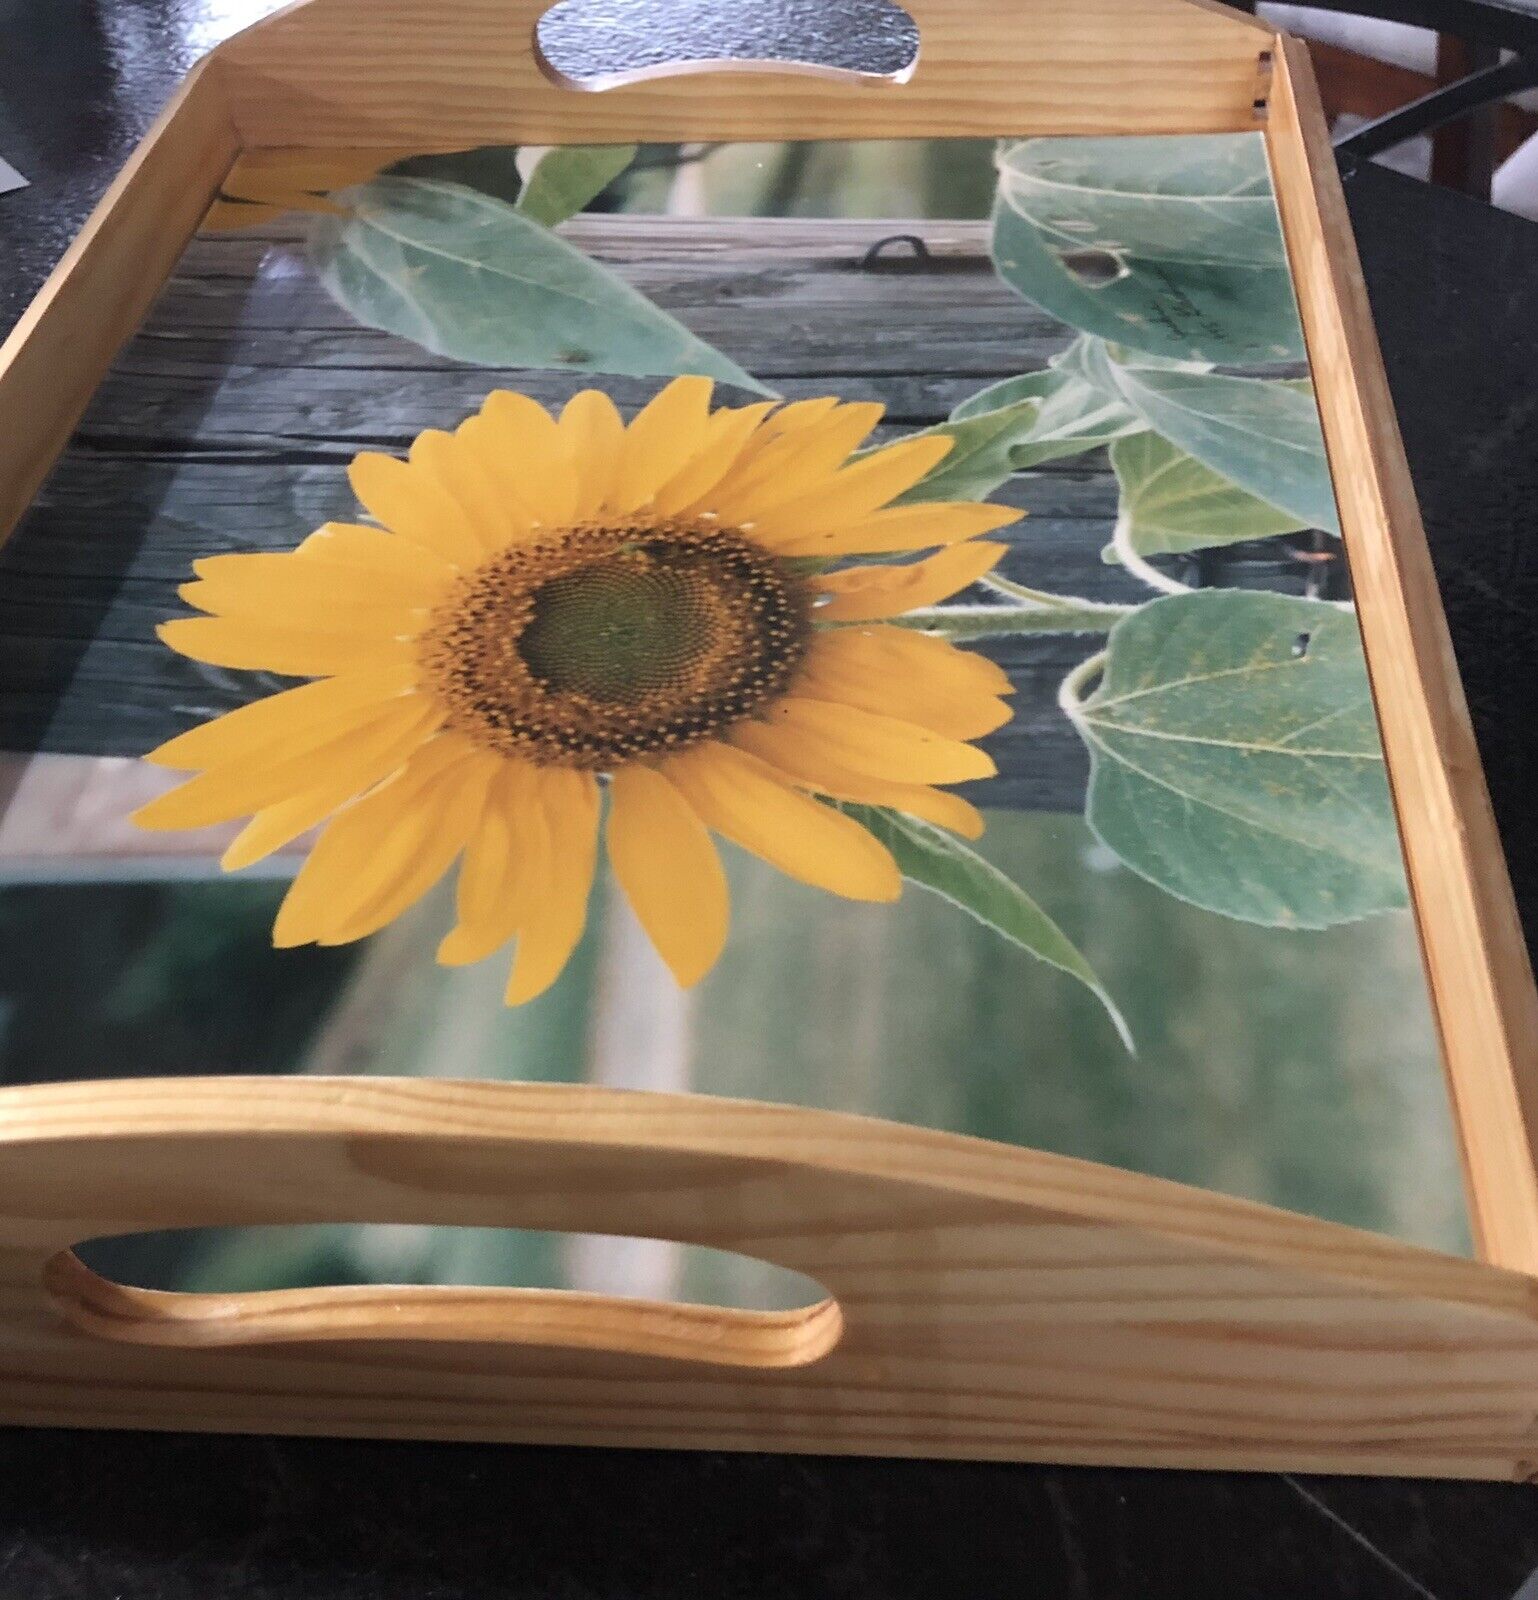 Handcrafted Wooden Serving Tray “Sunflower”